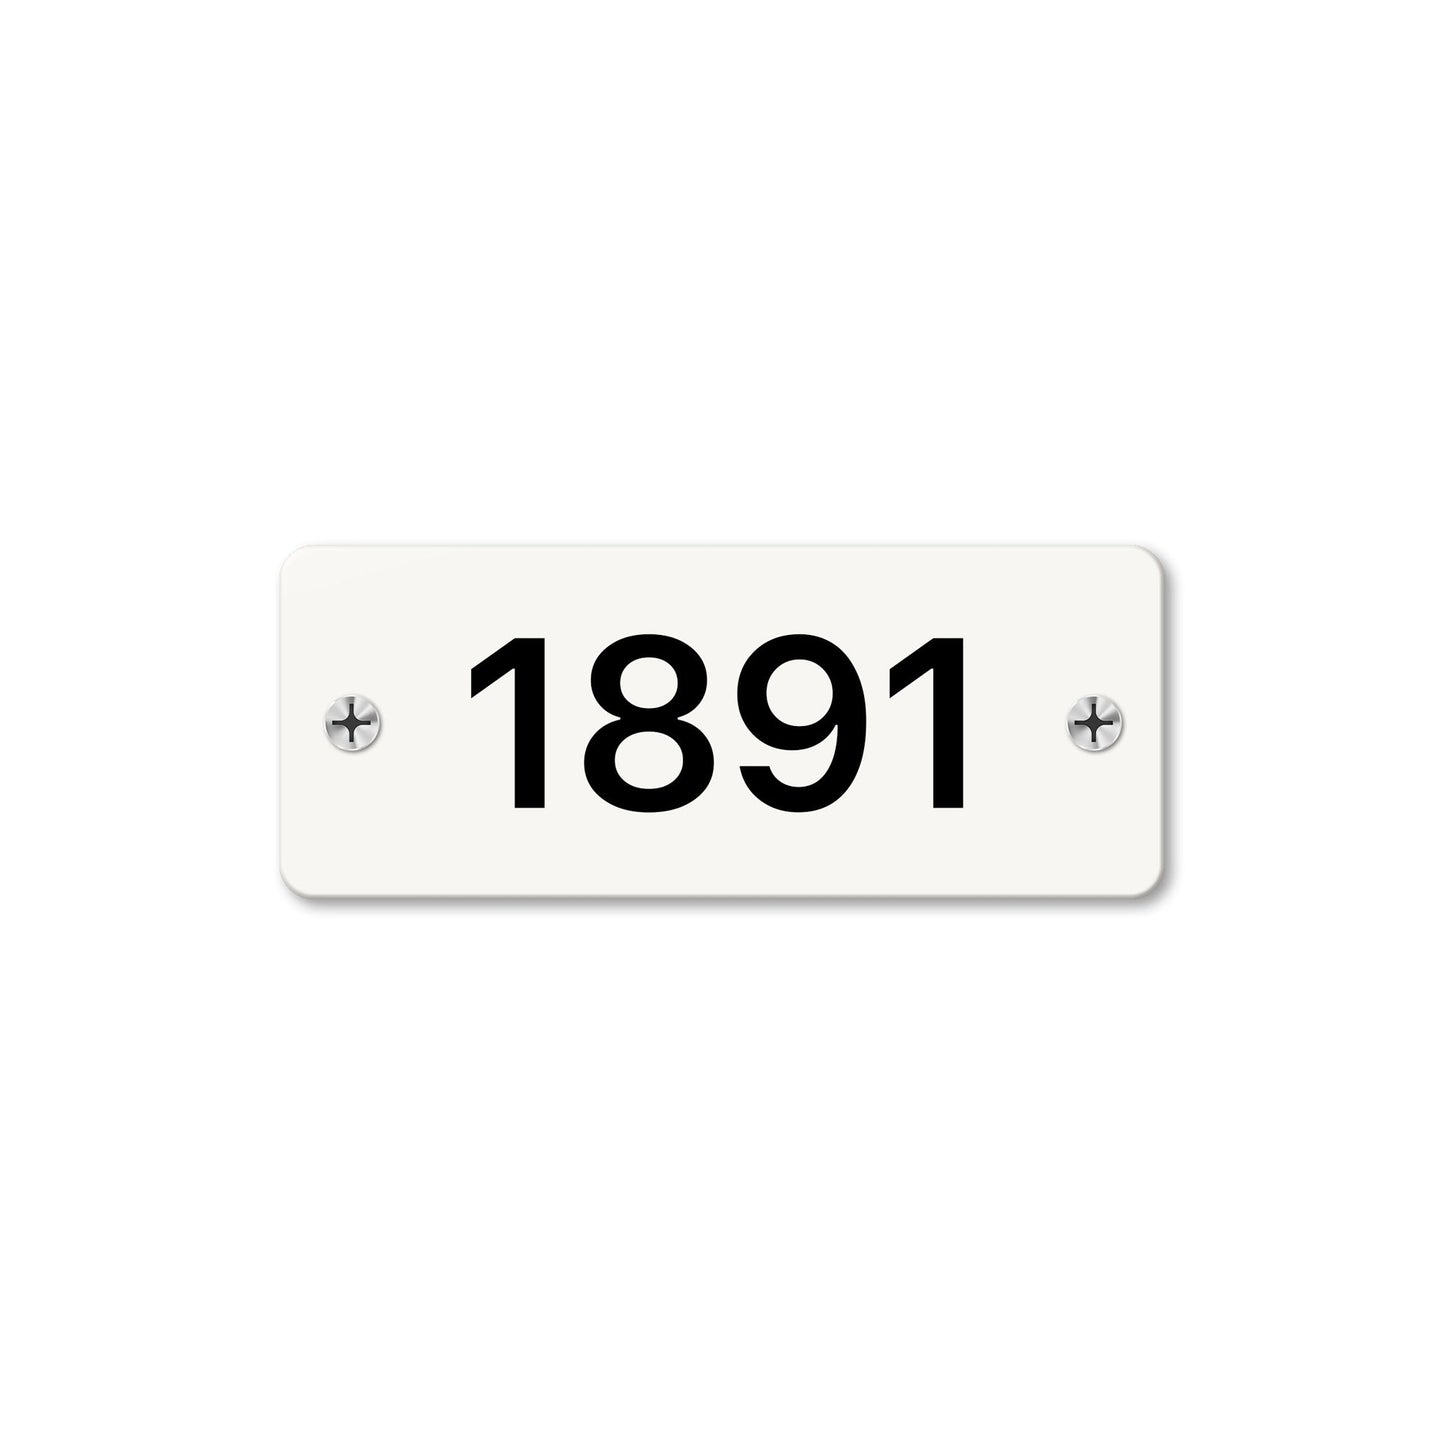 Numeral 1891